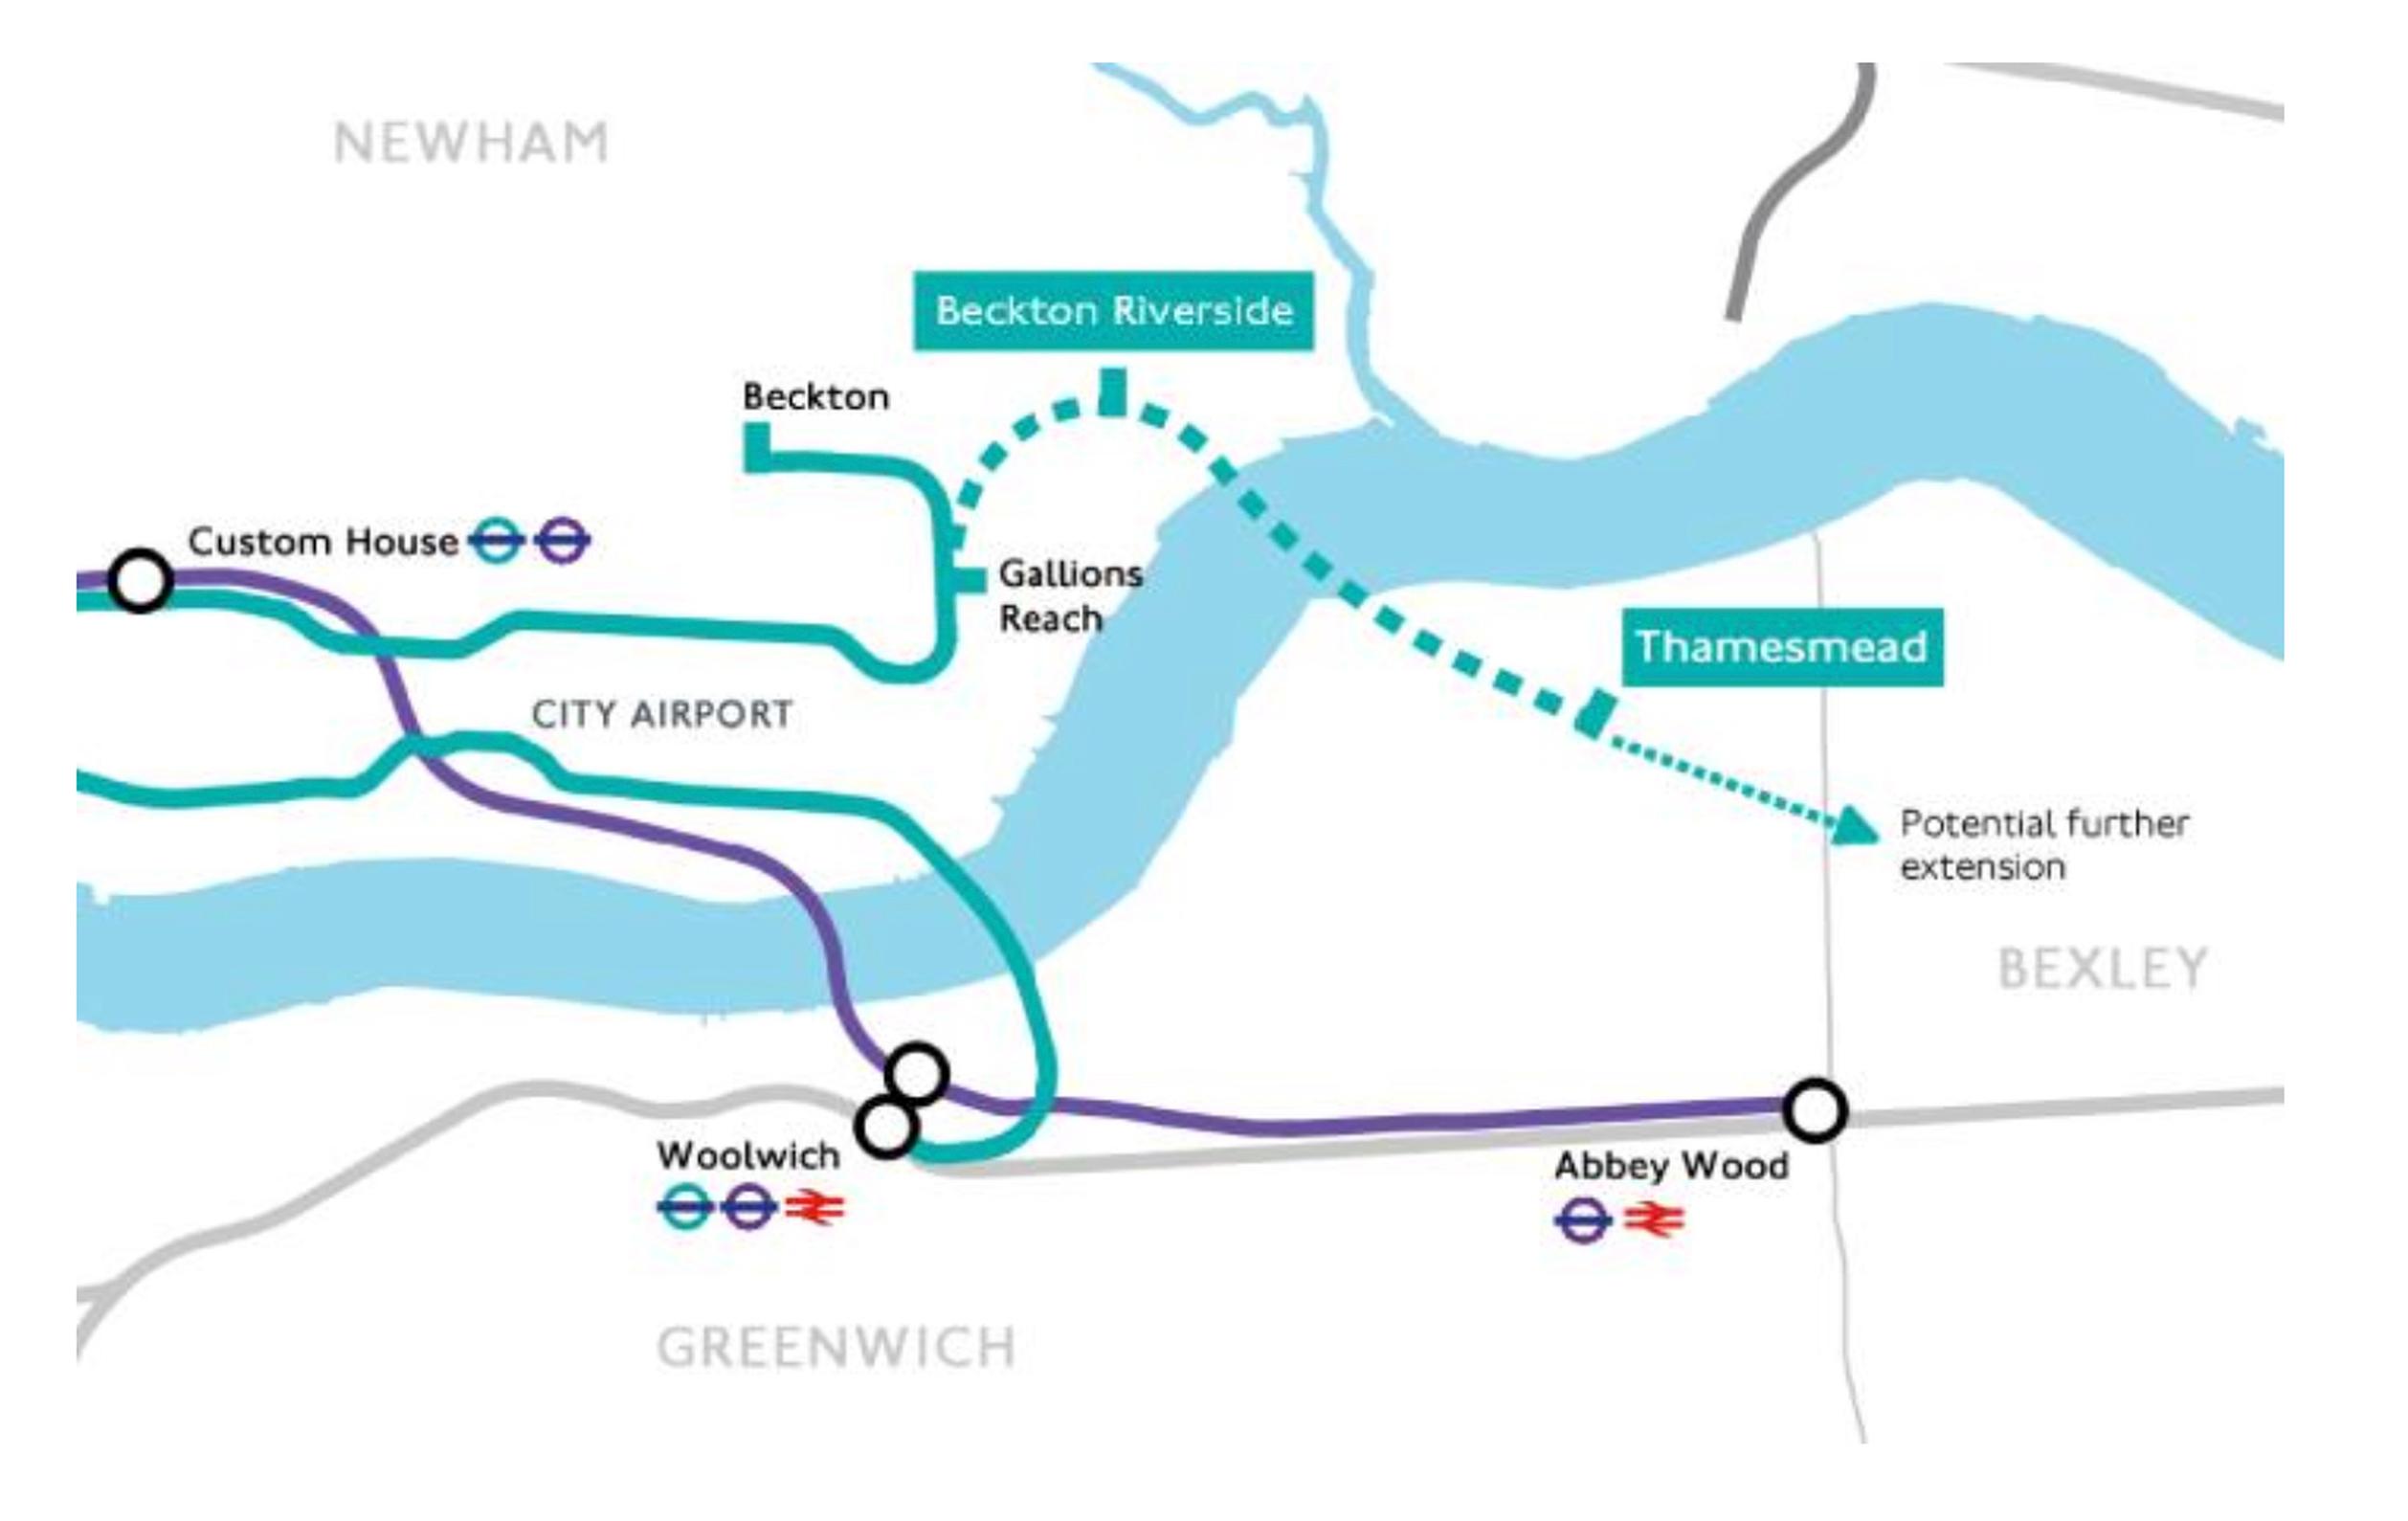 The DLR extension provide quicker journeys to Stratford and the Isle of Dogs, with direct connections to central London via the Jubilee and Elizabeth lines, said TfL